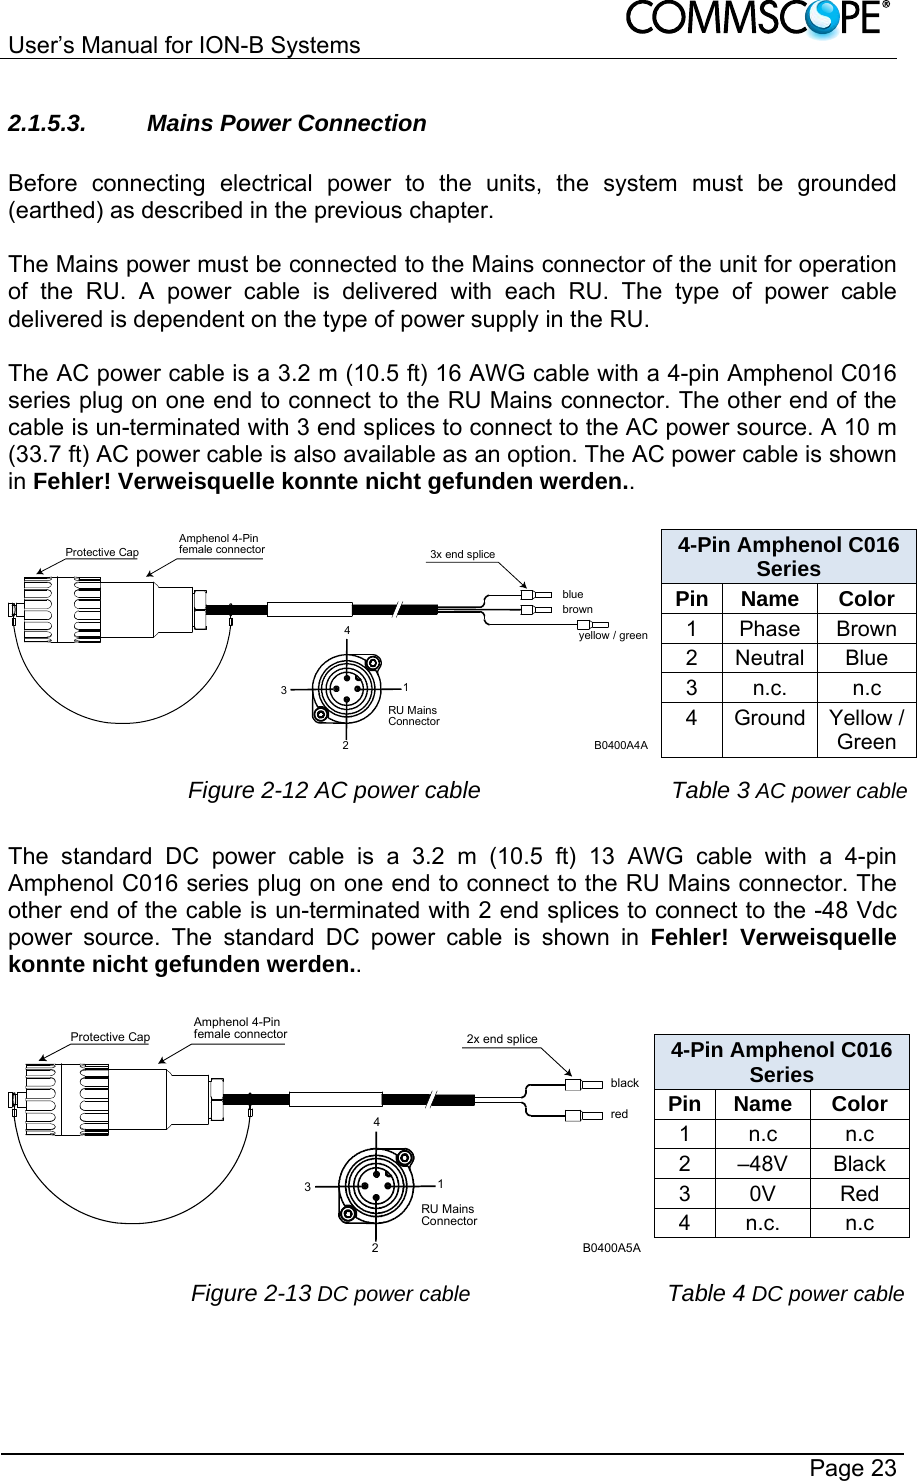 User’s Manual for ION-B Systems       Page 23 2.1.5.3. Mains Power Connection  Before connecting electrical power to the units, the system must be grounded (earthed) as described in the previous chapter.  The Mains power must be connected to the Mains connector of the unit for operation of the RU. A power cable is delivered with each RU. The type of power cable delivered is dependent on the type of power supply in the RU.  The AC power cable is a 3.2 m (10.5 ft) 16 AWG cable with a 4-pin Amphenol C016 series plug on one end to connect to the RU Mains connector. The other end of the cable is un-terminated with 3 end splices to connect to the AC power source. A 10 m (33.7 ft) AC power cable is also available as an option. The AC power cable is shown in Fehler! Verweisquelle konnte nicht gefunden werden..  blueAmphenol 4-Pinfemale connectorProtective Cap 3x end splicebrownyellow / greenB0400A4ARU MainsConnector43214-Pin Amphenol C016 Series Pin Name  Color 1 Phase Brown 2 Neutral  Blue 3 n.c.  n.c 4 Ground Yellow / Green  Figure 2-12 AC power cable Table 3 AC power cable The standard DC power cable is a 3.2 m (10.5 ft) 13 AWG cable with a 4-pin Amphenol C016 series plug on one end to connect to the RU Mains connector. The other end of the cable is un-terminated with 2 end splices to connect to the -48 Vdc power source. The standard DC power cable is shown in Fehler! Verweisquelle konnte nicht gefunden werden..  blackAmphenol 4-Pinfemale connectorProtective Cap 2x end spliceredB0400A5ARU MainsConnector43214-Pin Amphenol C016 Series Pin Name  Color 1 n.c  n.c 2 –48V Black 3 0V  Red 4 n.c.  n.c  Figure 2-13 DC power cable  Table 4 DC power cable  